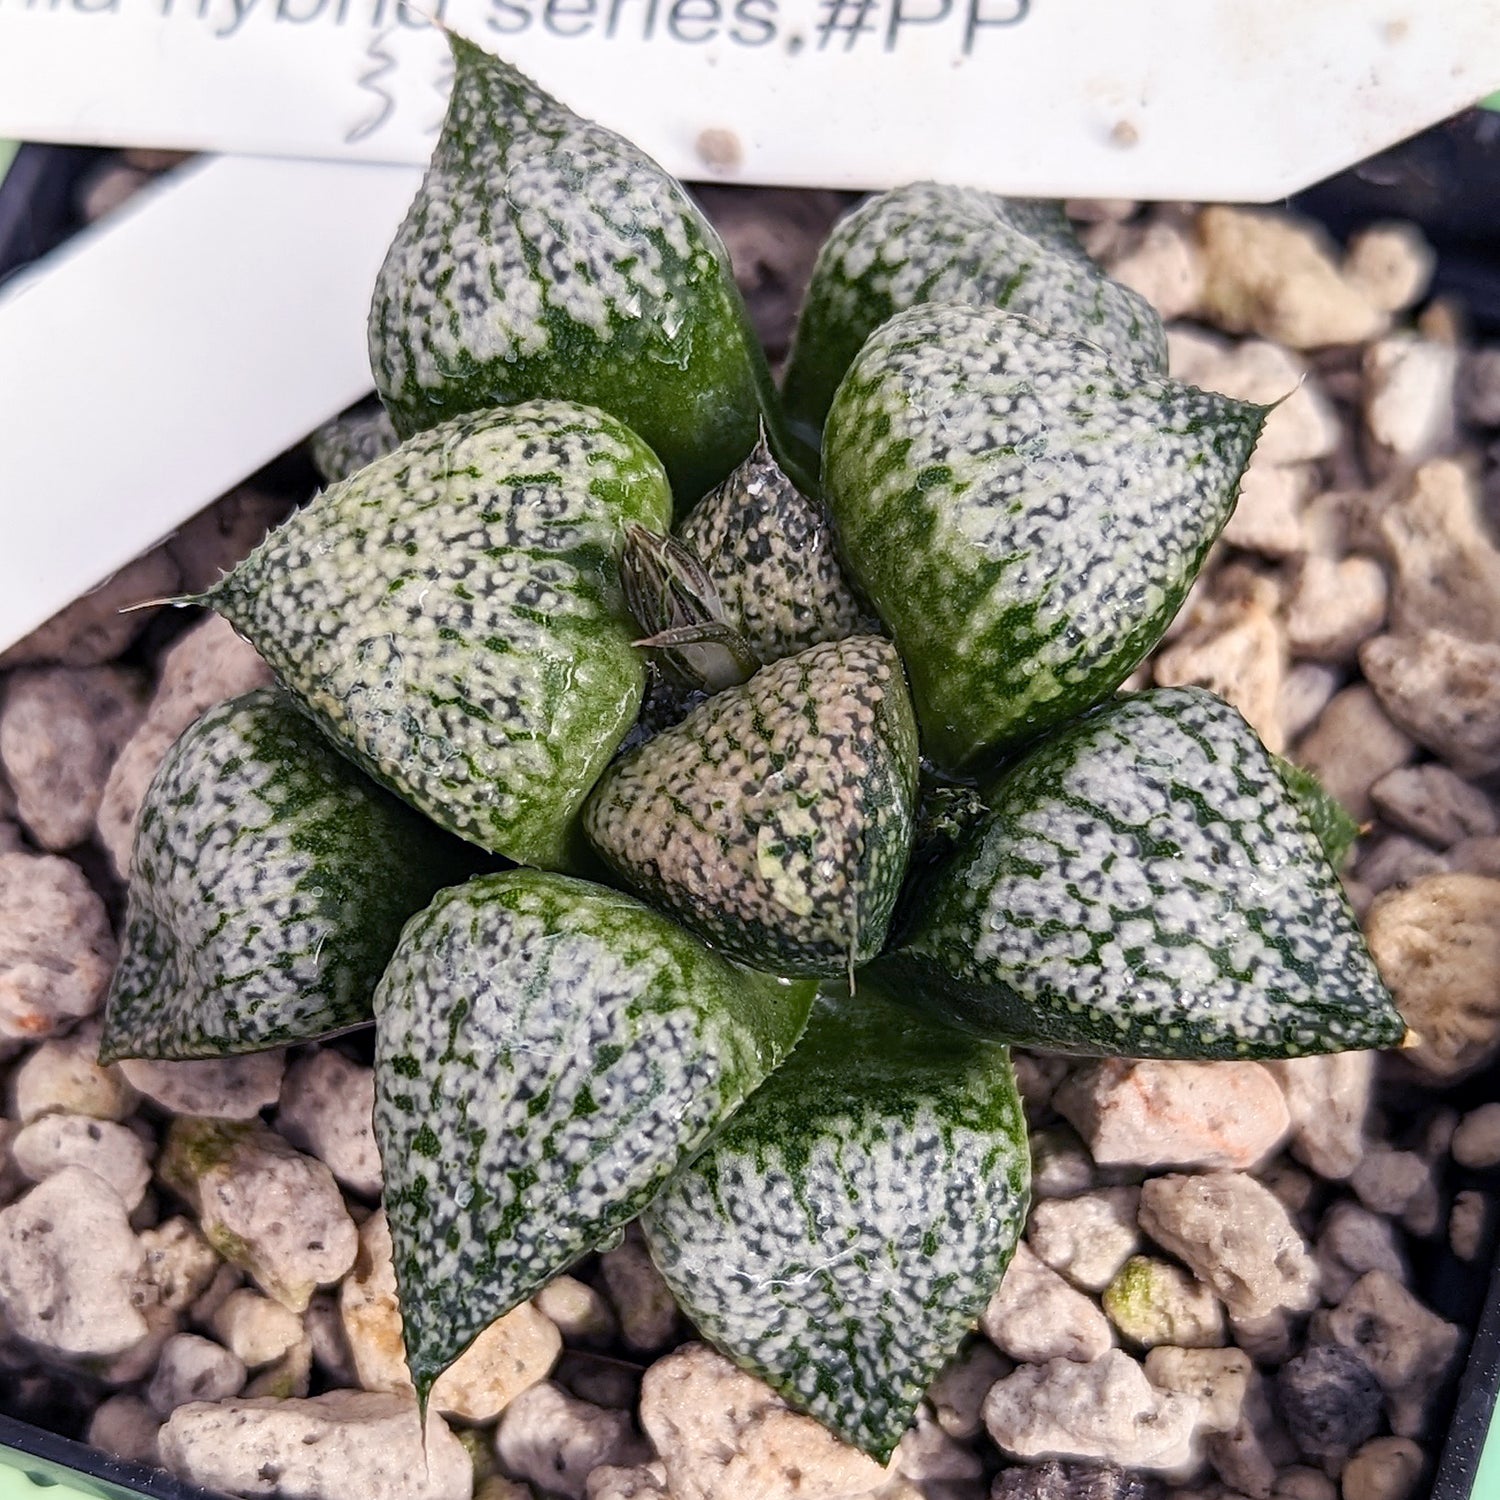 Haworthia "PP331" picta x Empress hybrid series #1 SOLD OUT